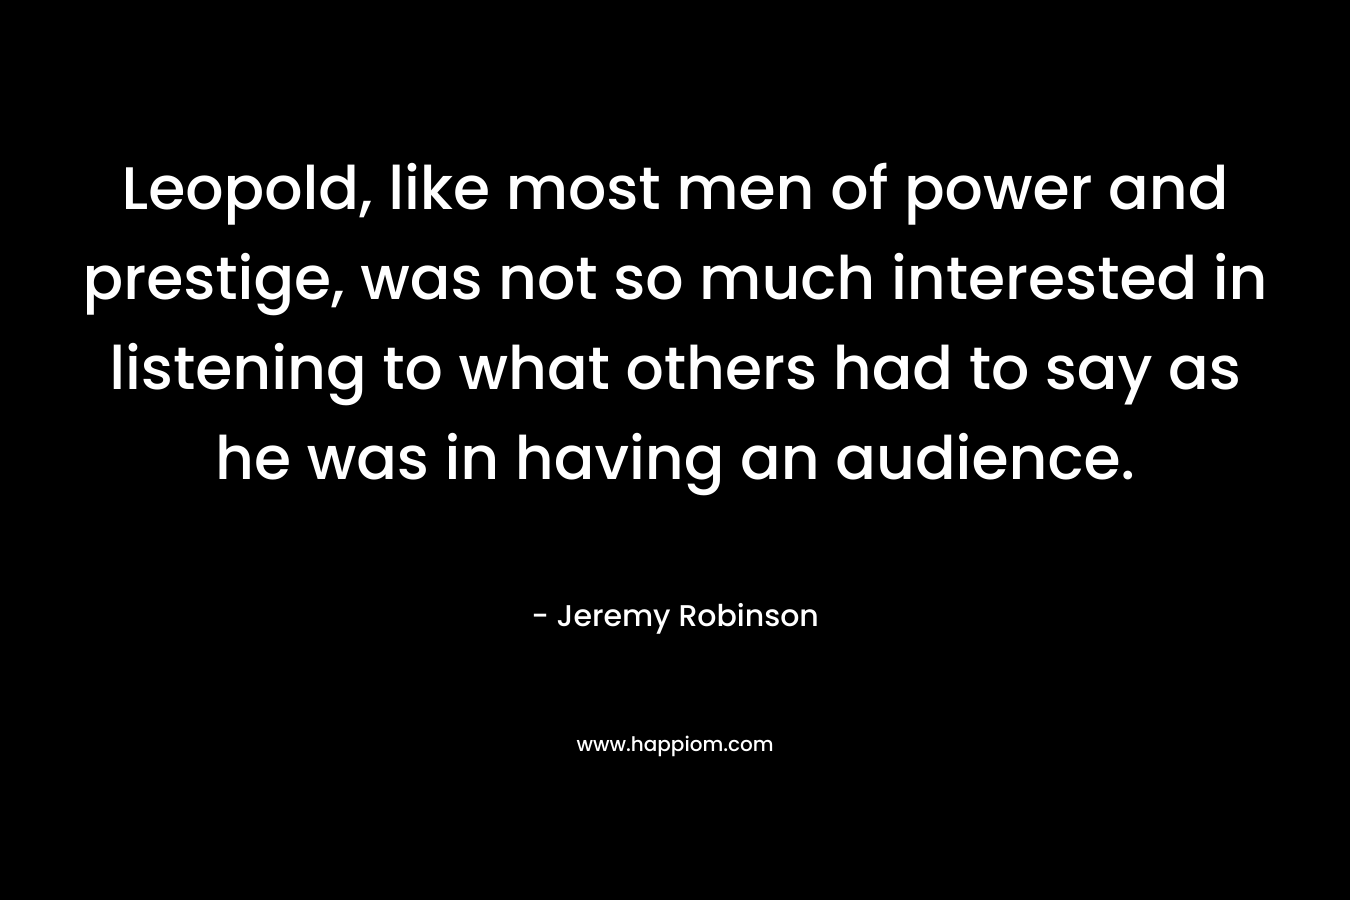 Leopold, like most men of power and prestige, was not so much interested in listening to what others had to say as he was in having an audience. – Jeremy Robinson